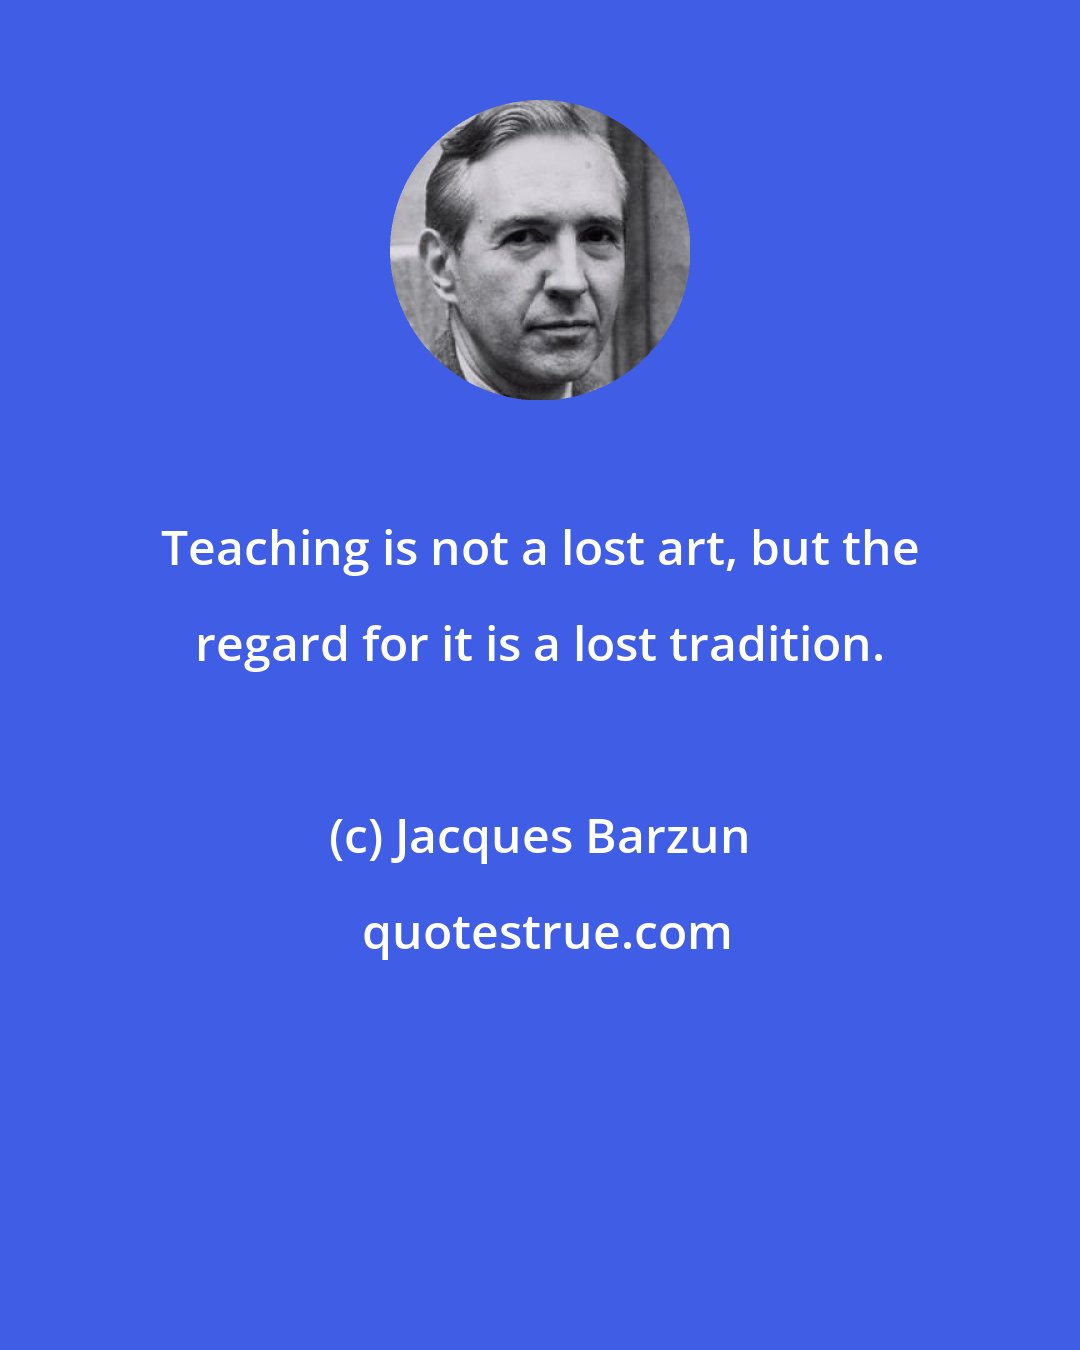 Jacques Barzun: Teaching is not a lost art, but the regard for it is a lost tradition.